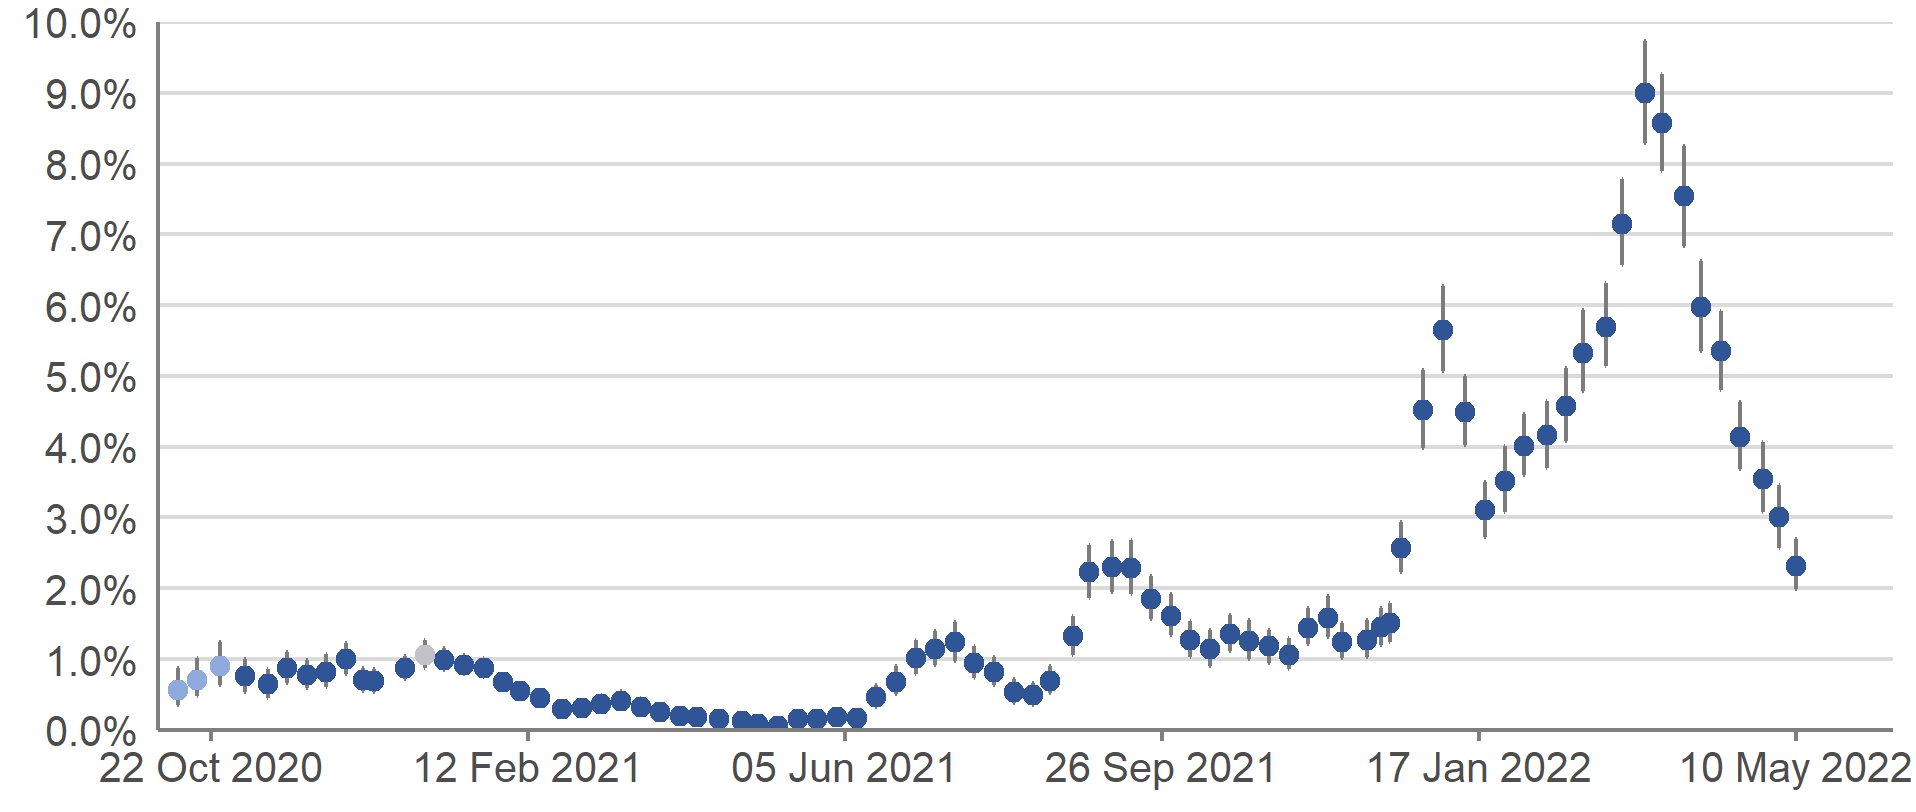 The estimated percentage of the private residential population testing positive for COVID-19 in Scotland increased between late-January and mid-March 2022. The estimate for the week 14 to 20 March 2022 was the highest estimate for Scotland since the survey began. Since late-March, the estimated percentage of people testing positive in Scotland has been decreasing.